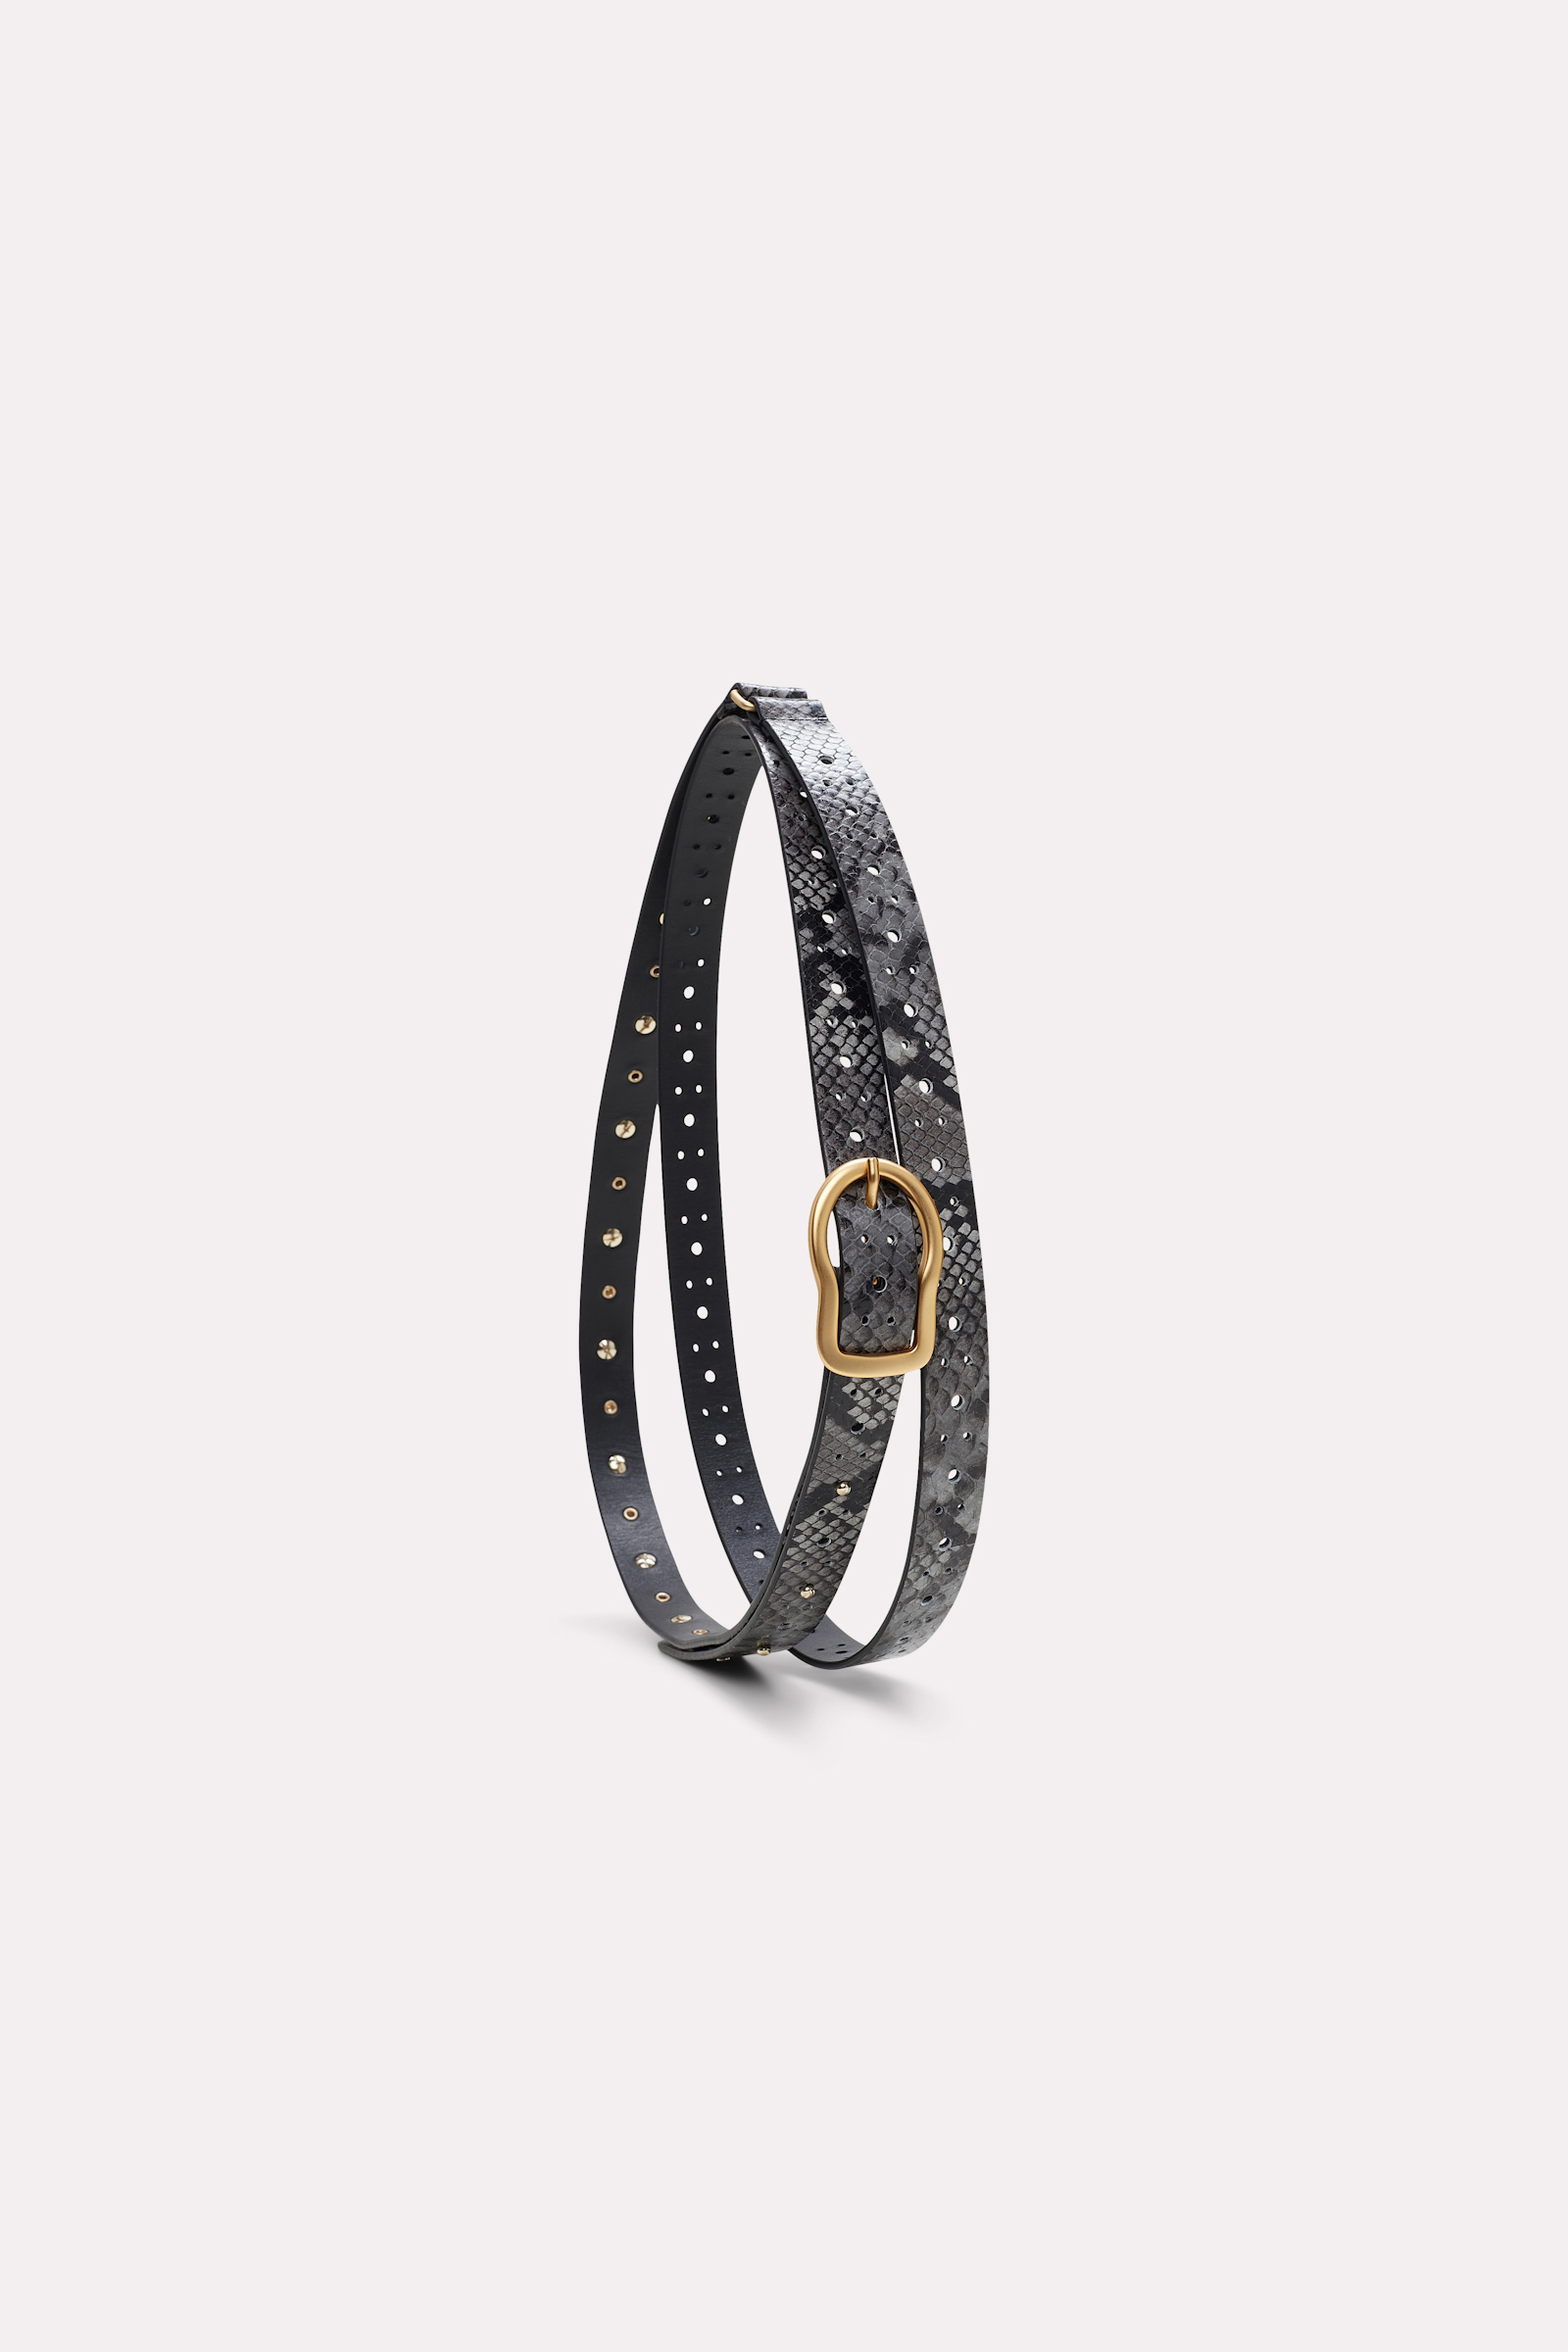 Dorothee Schumacher Double wrap belt with cut-out hole details grey black snake mix